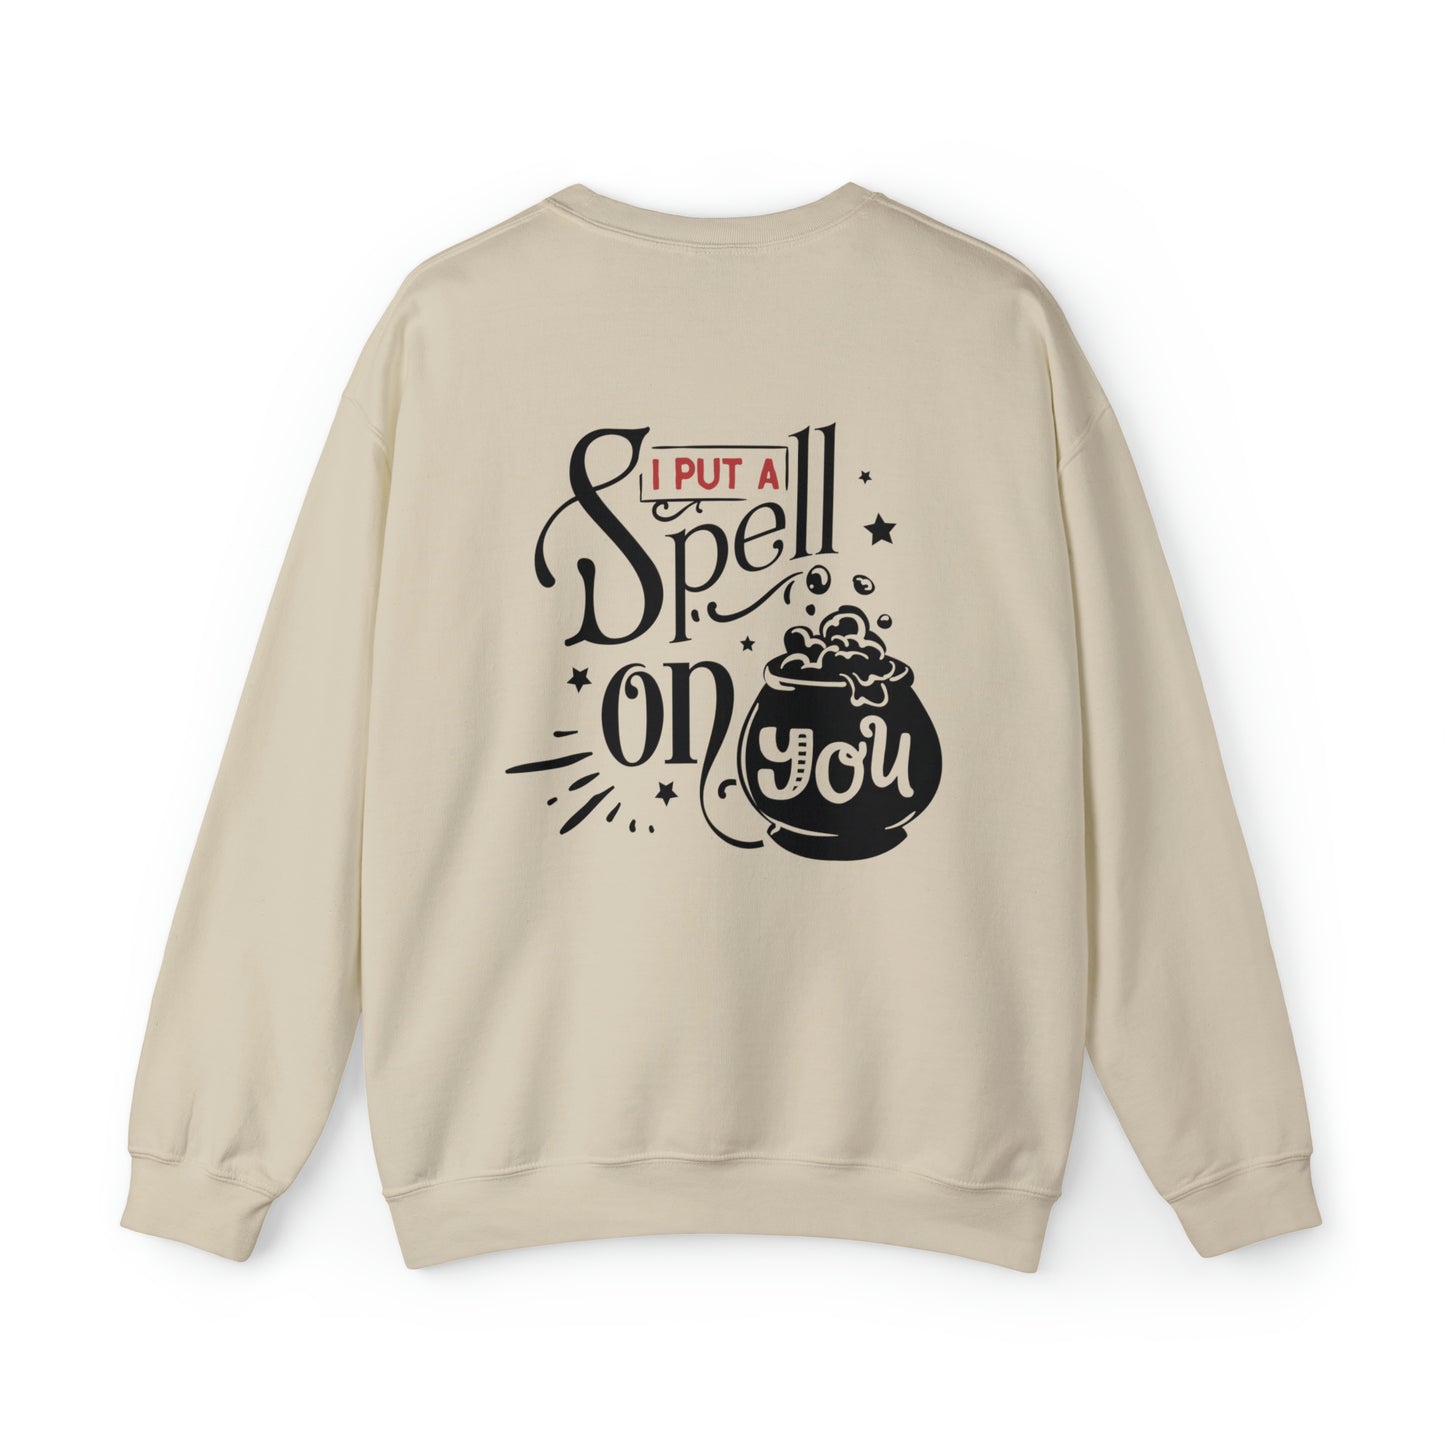 You’re my boo! I Put a Spell on You Sweatshirt